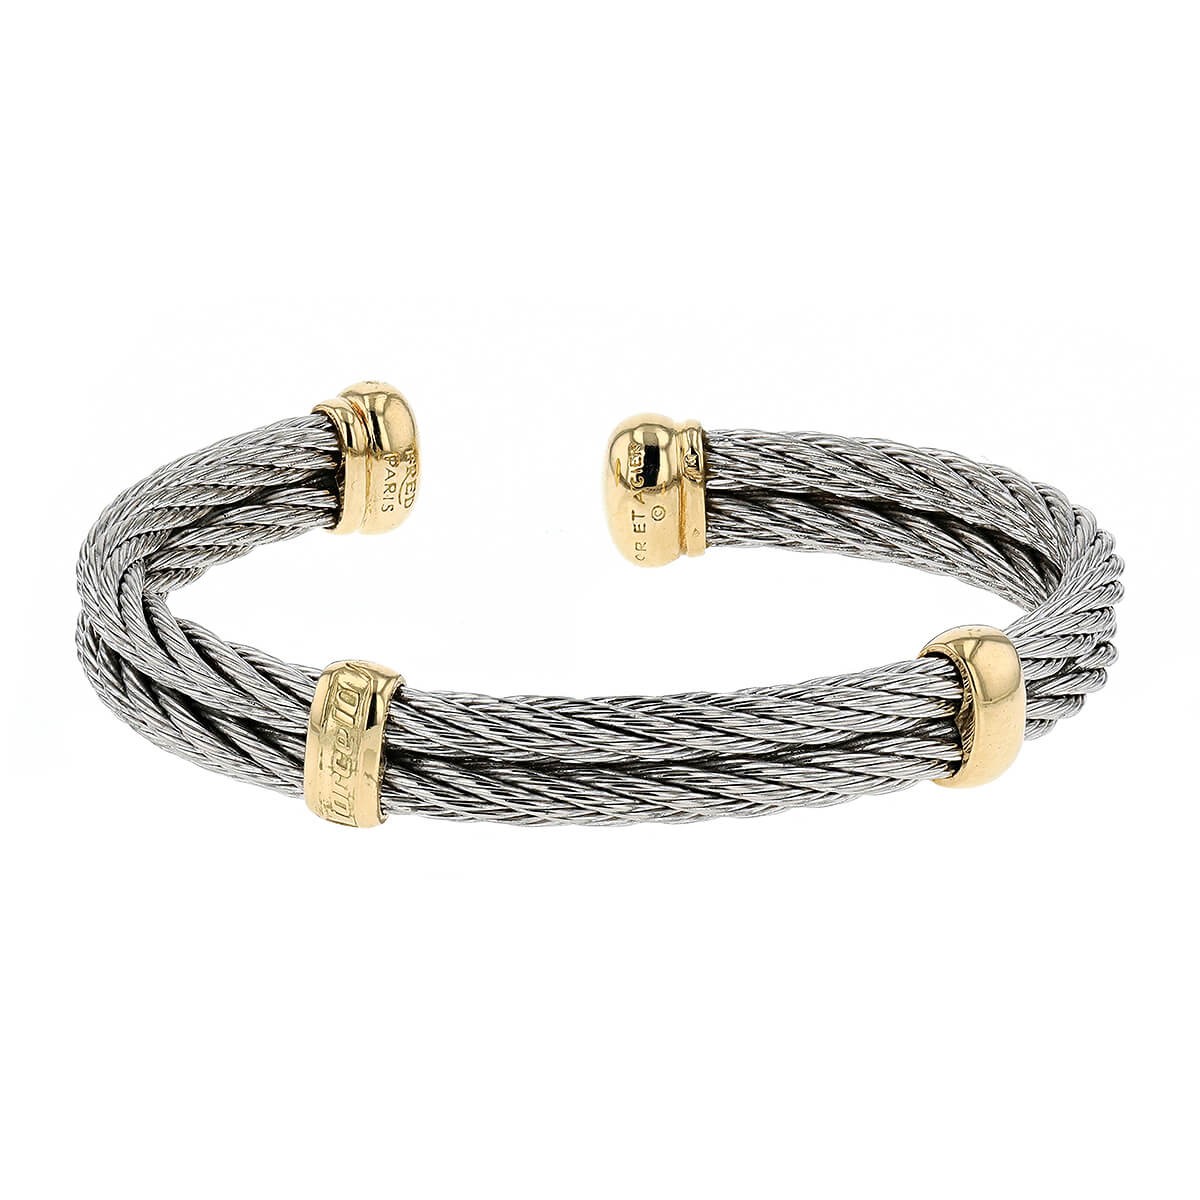 Purchase FRED Force 10 bracelet, small size, rose gold and diamonds